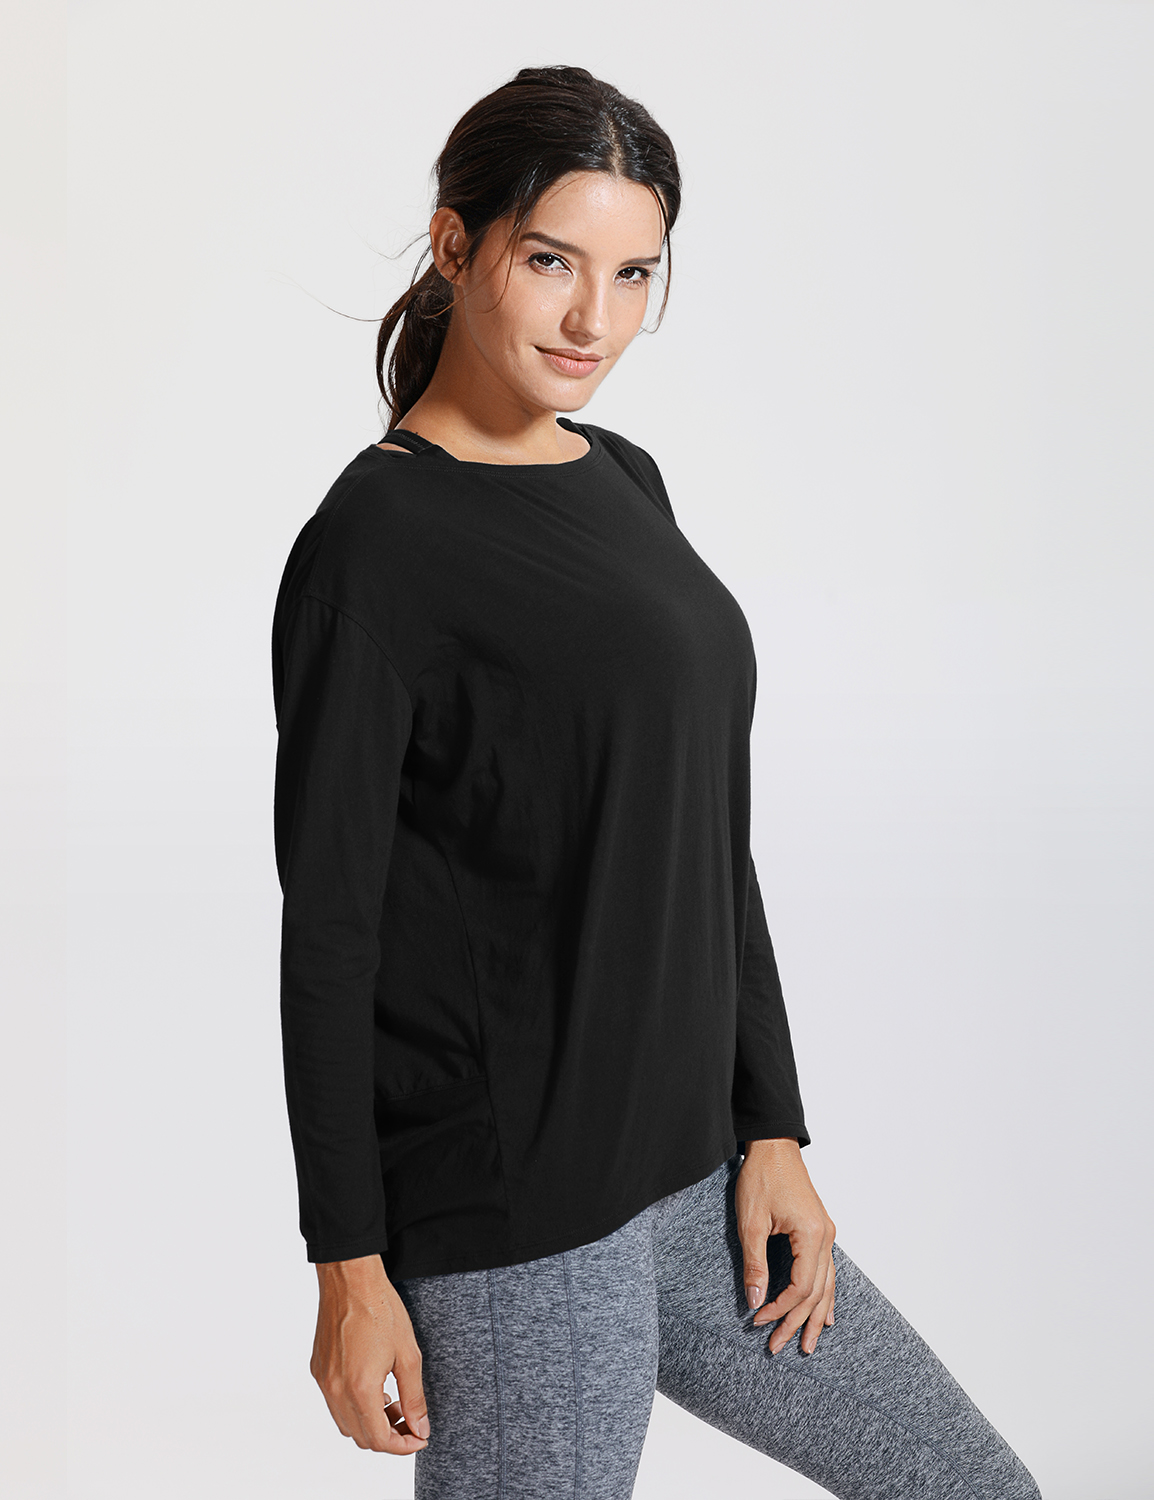 Loose Workout Tops With Sleeves